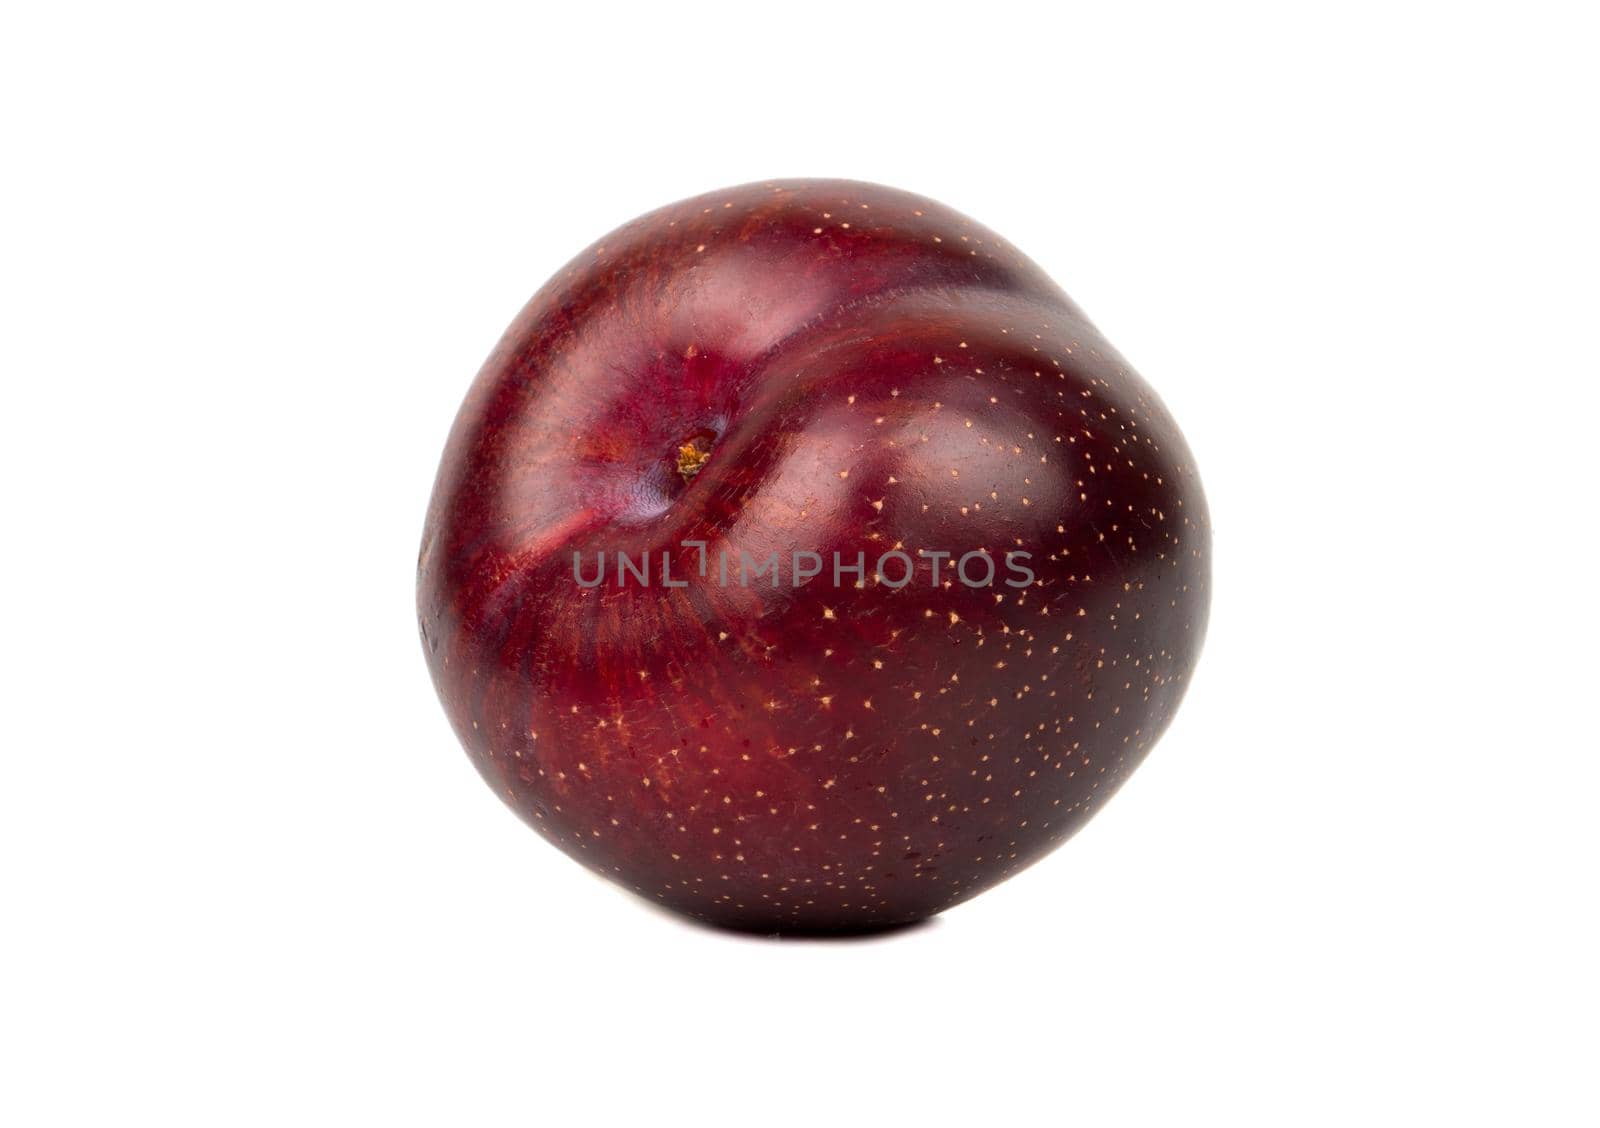 Big red plum by andregric